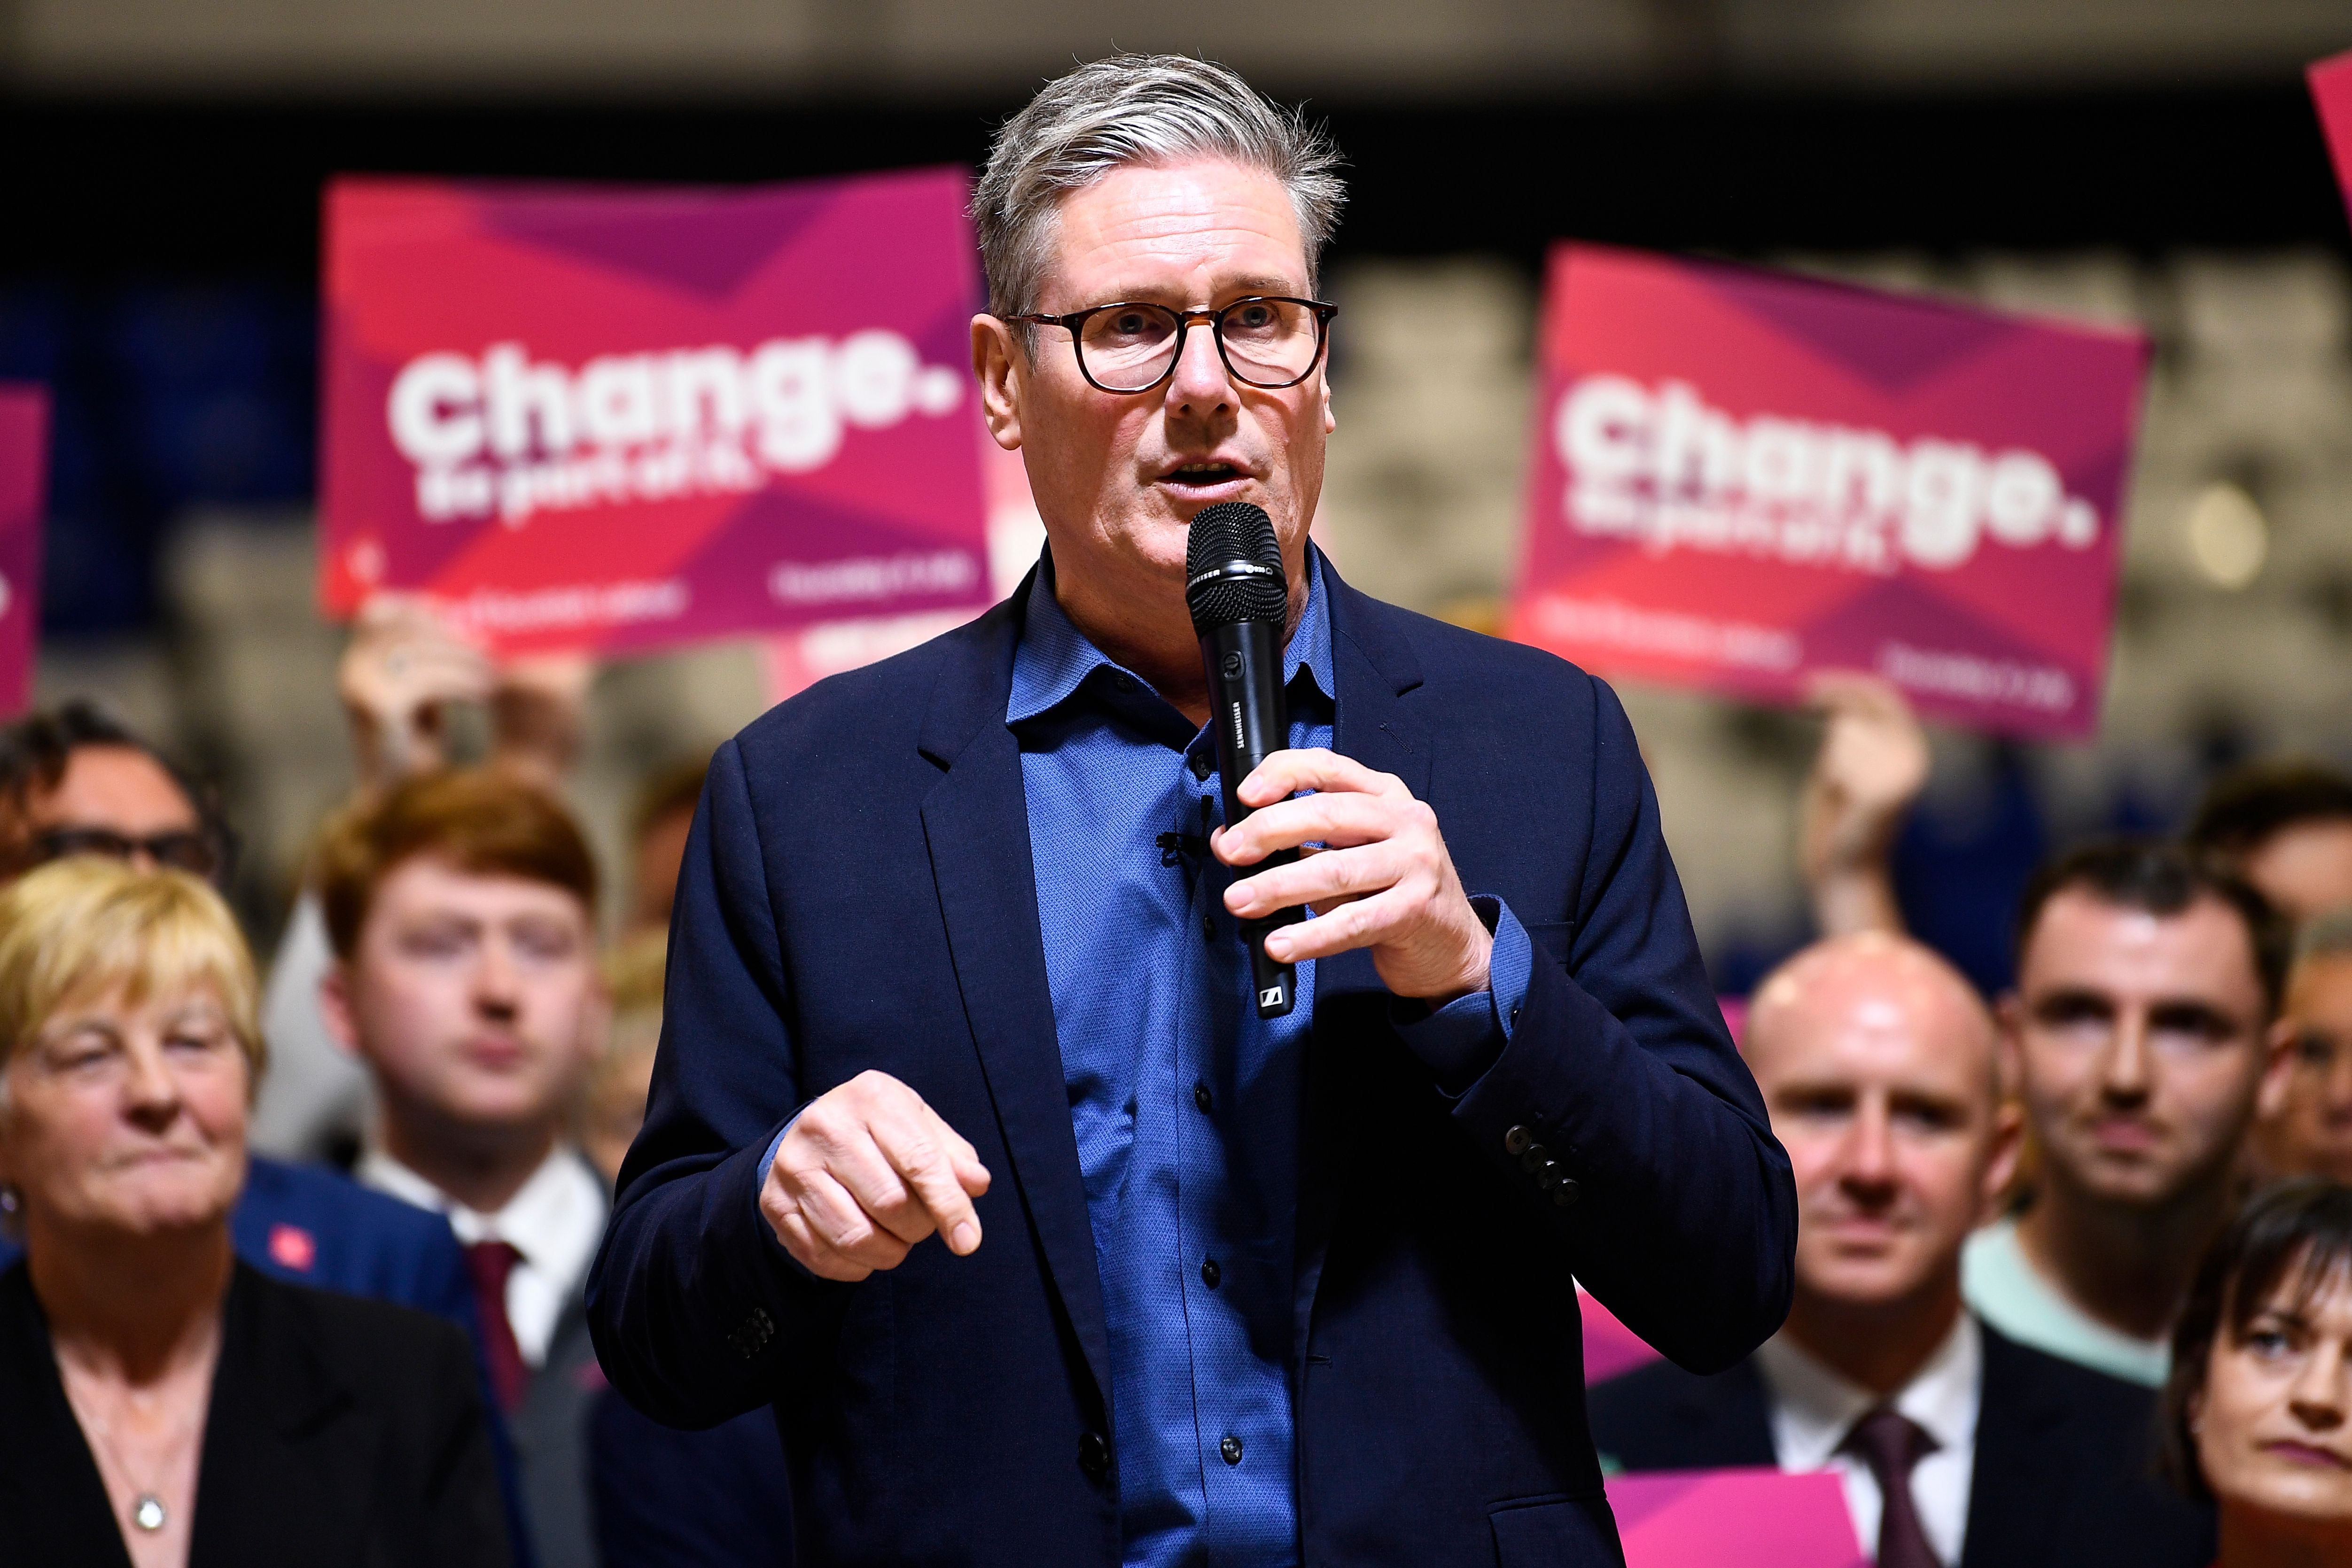 Sir Keir Starmer will storm Downing Street with a super-majority if the polls are correct